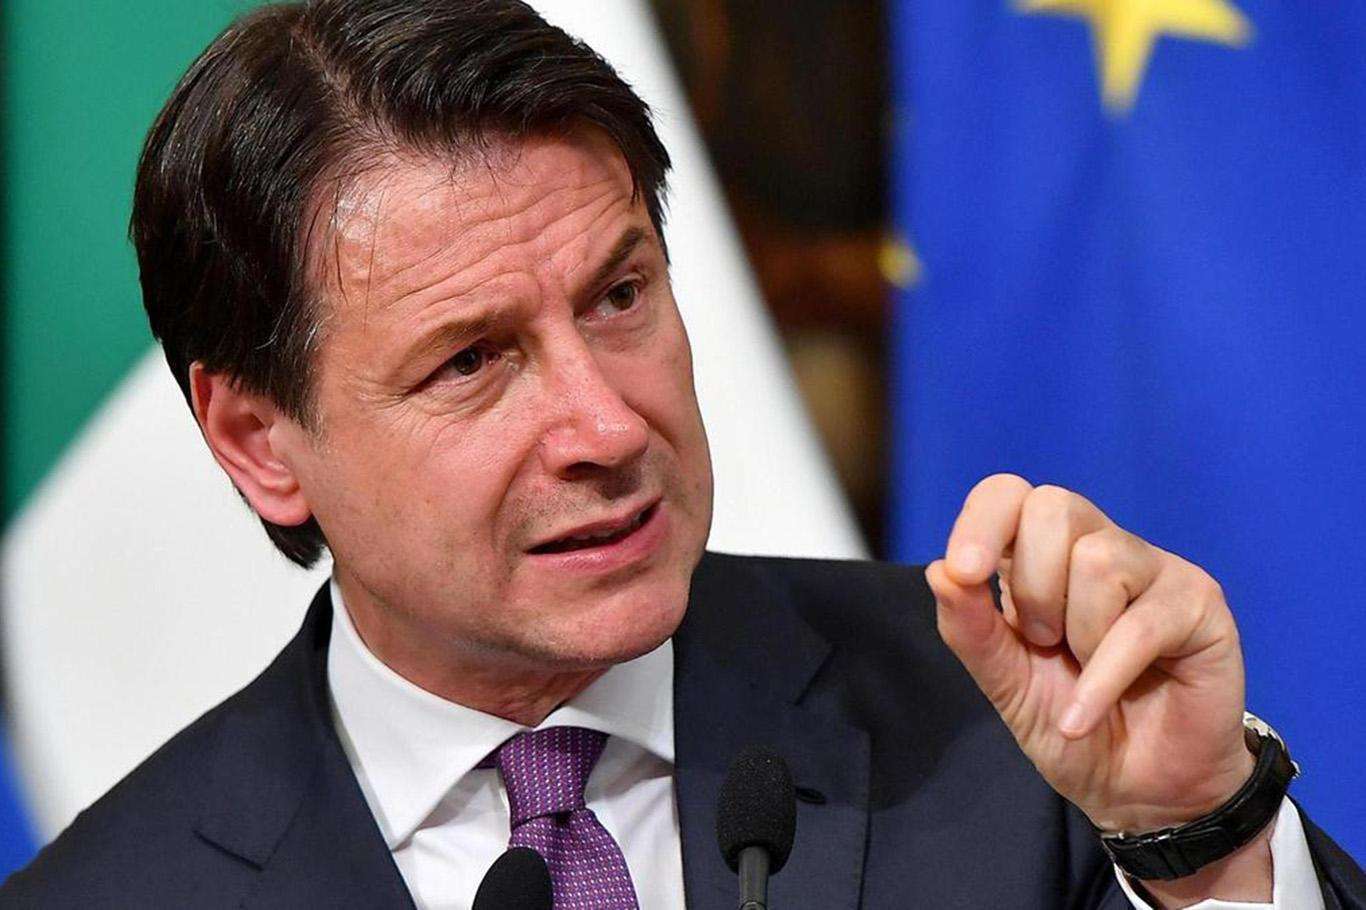 Italy’s Prime Minister Giuseppe Conte resigns